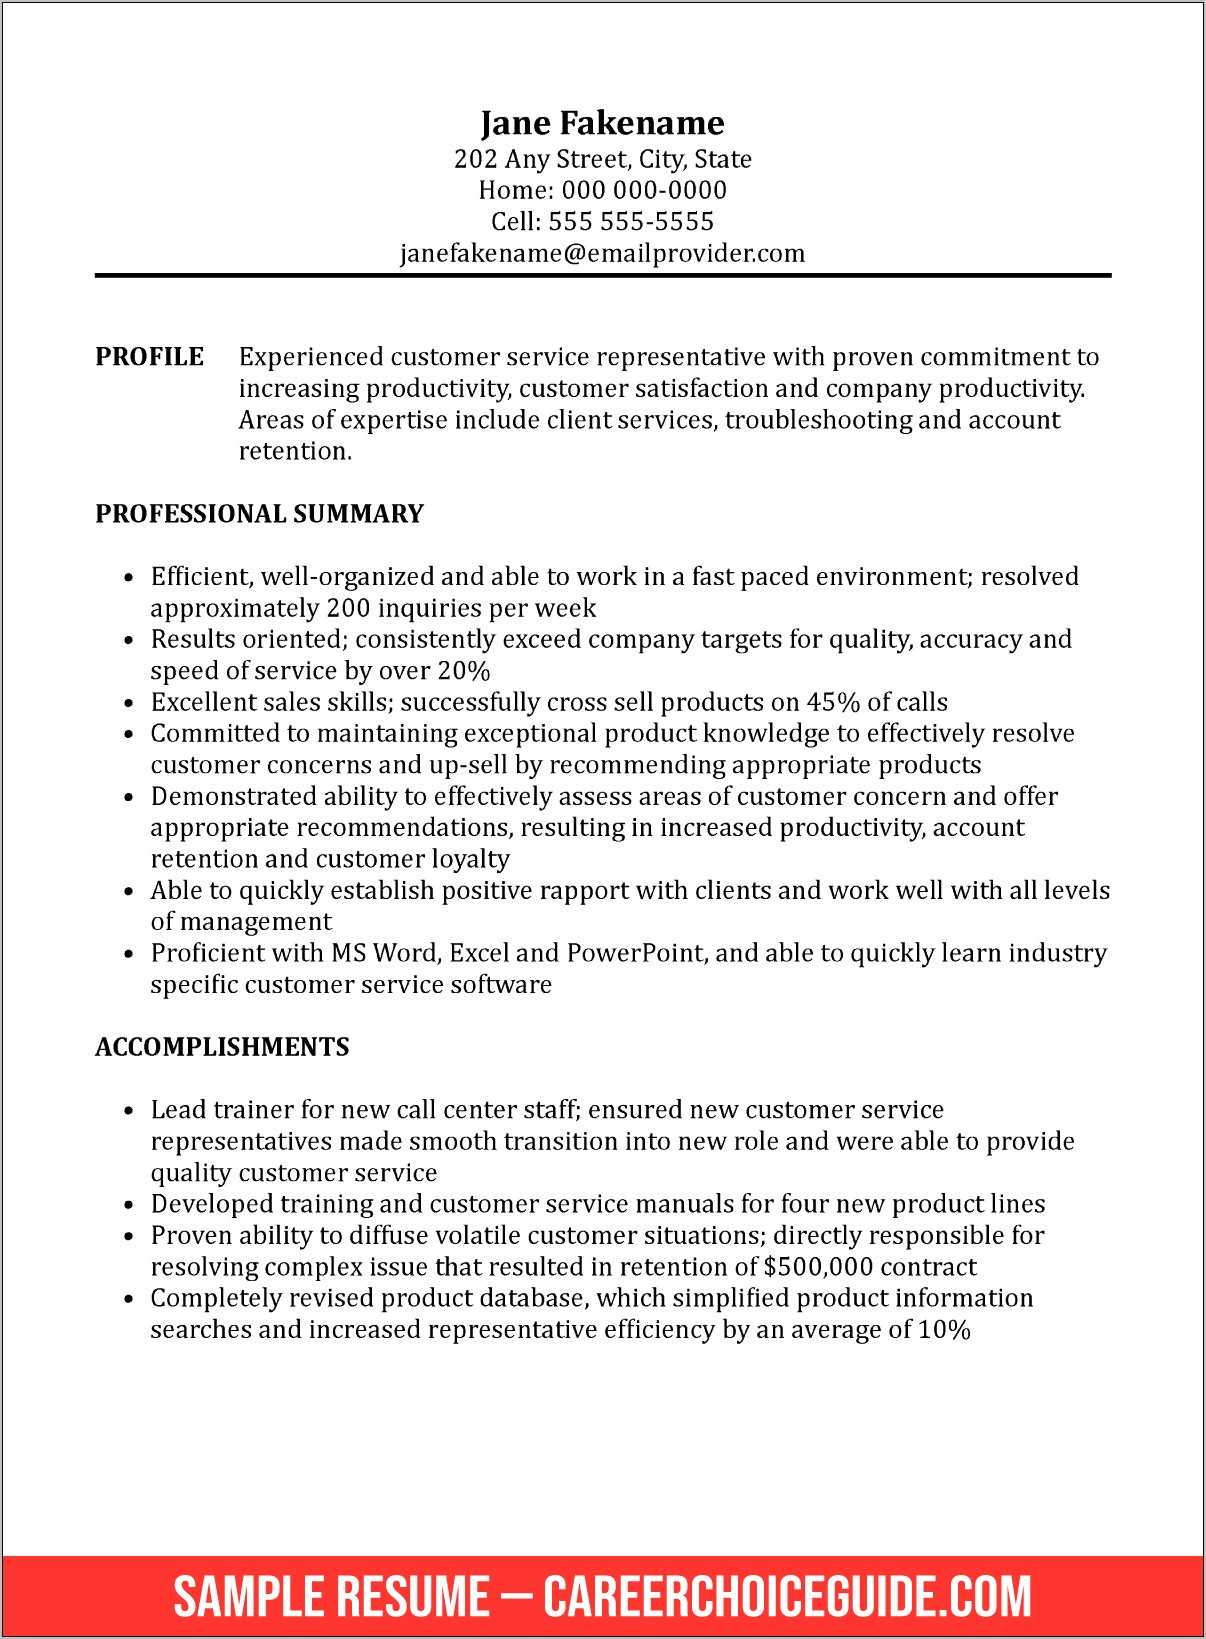 Resume To Work As A Customer Service Rep